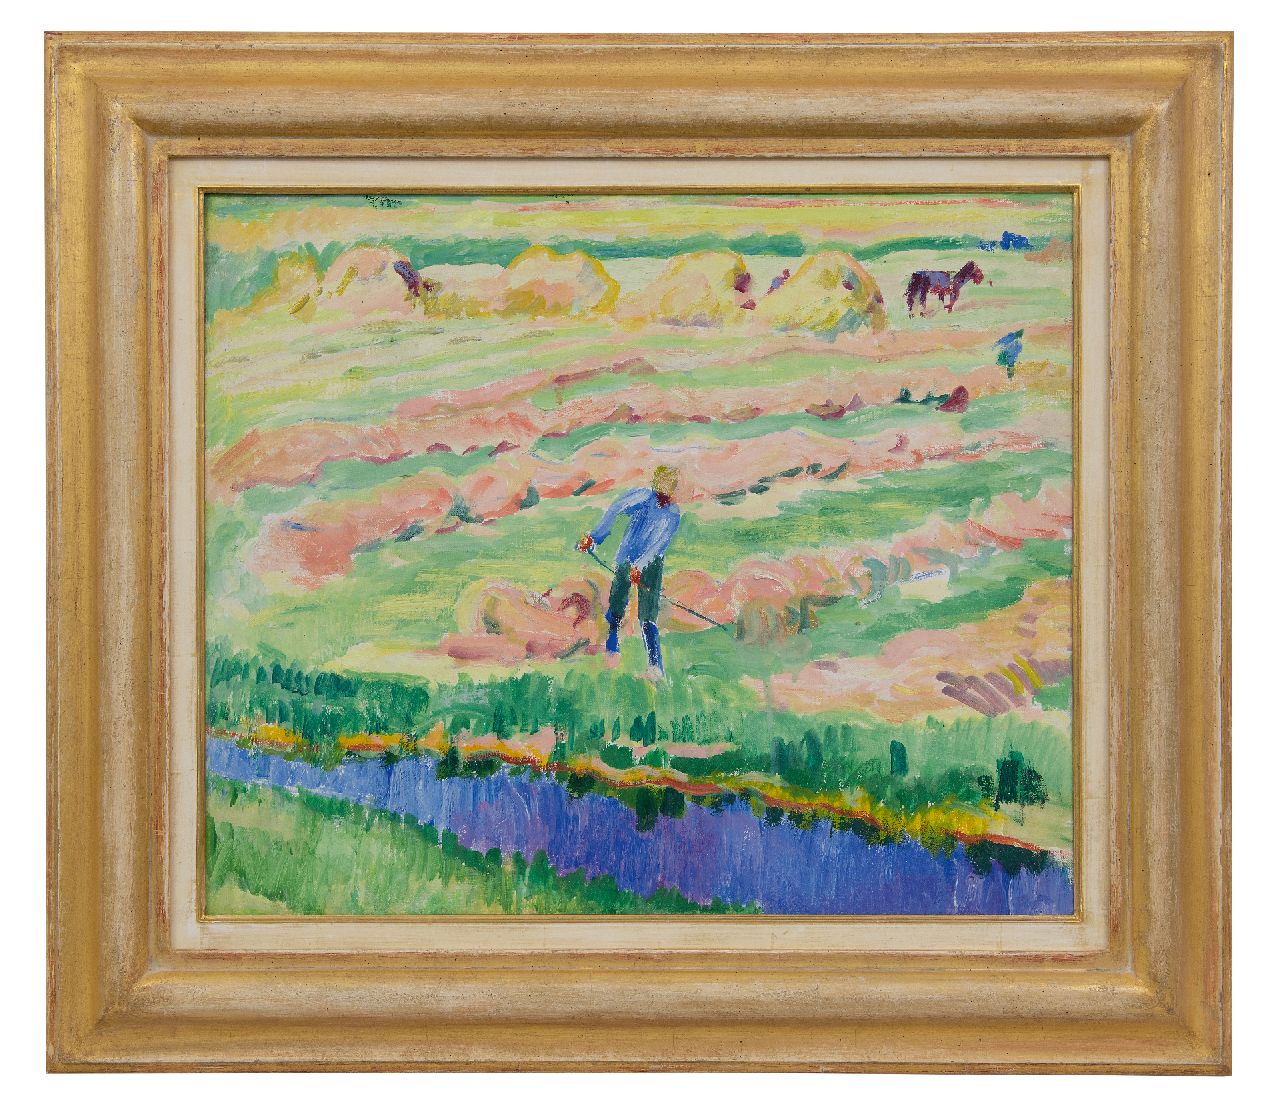 Altink J.  | Jan Altink | Paintings offered for sale | Landscape with haymaking farmer, oil on canvas 50.3 x 60.2 cm